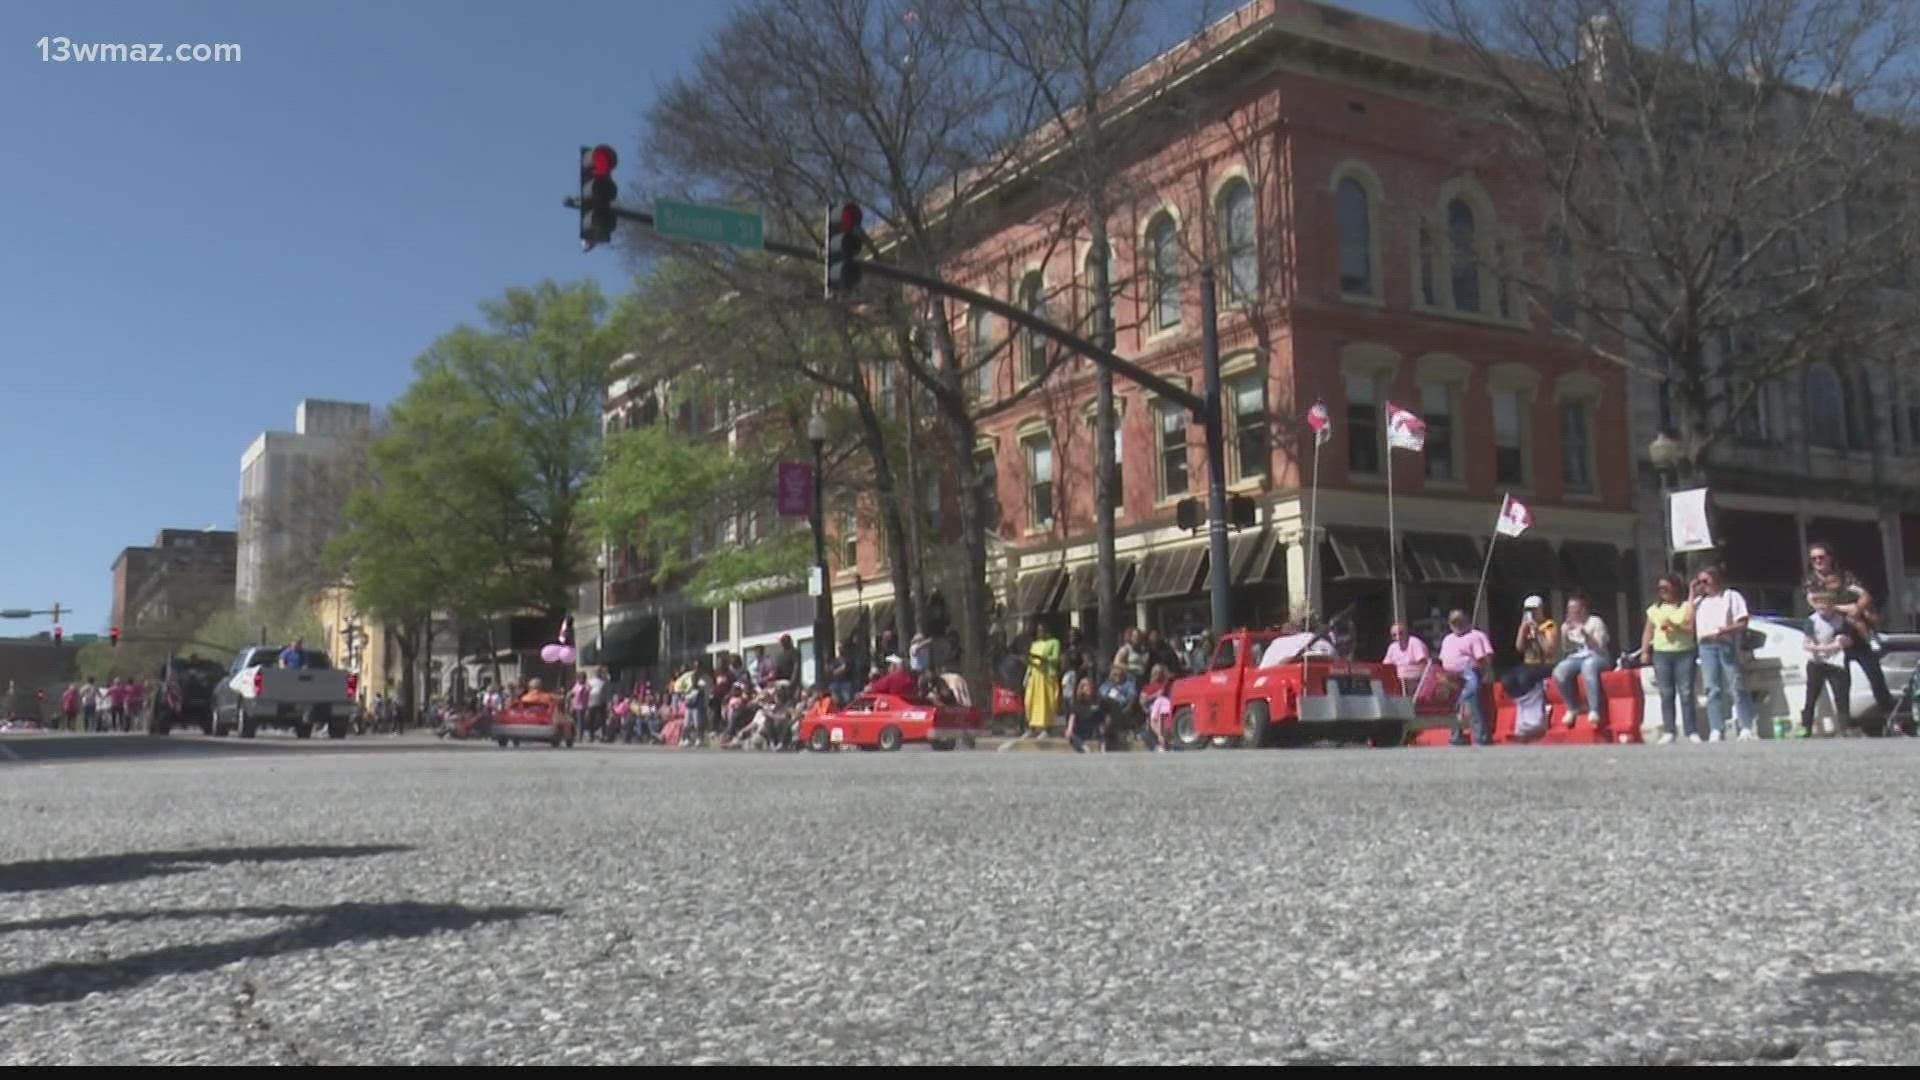 The hourlong parade went from 3-4 p.m. Sunday